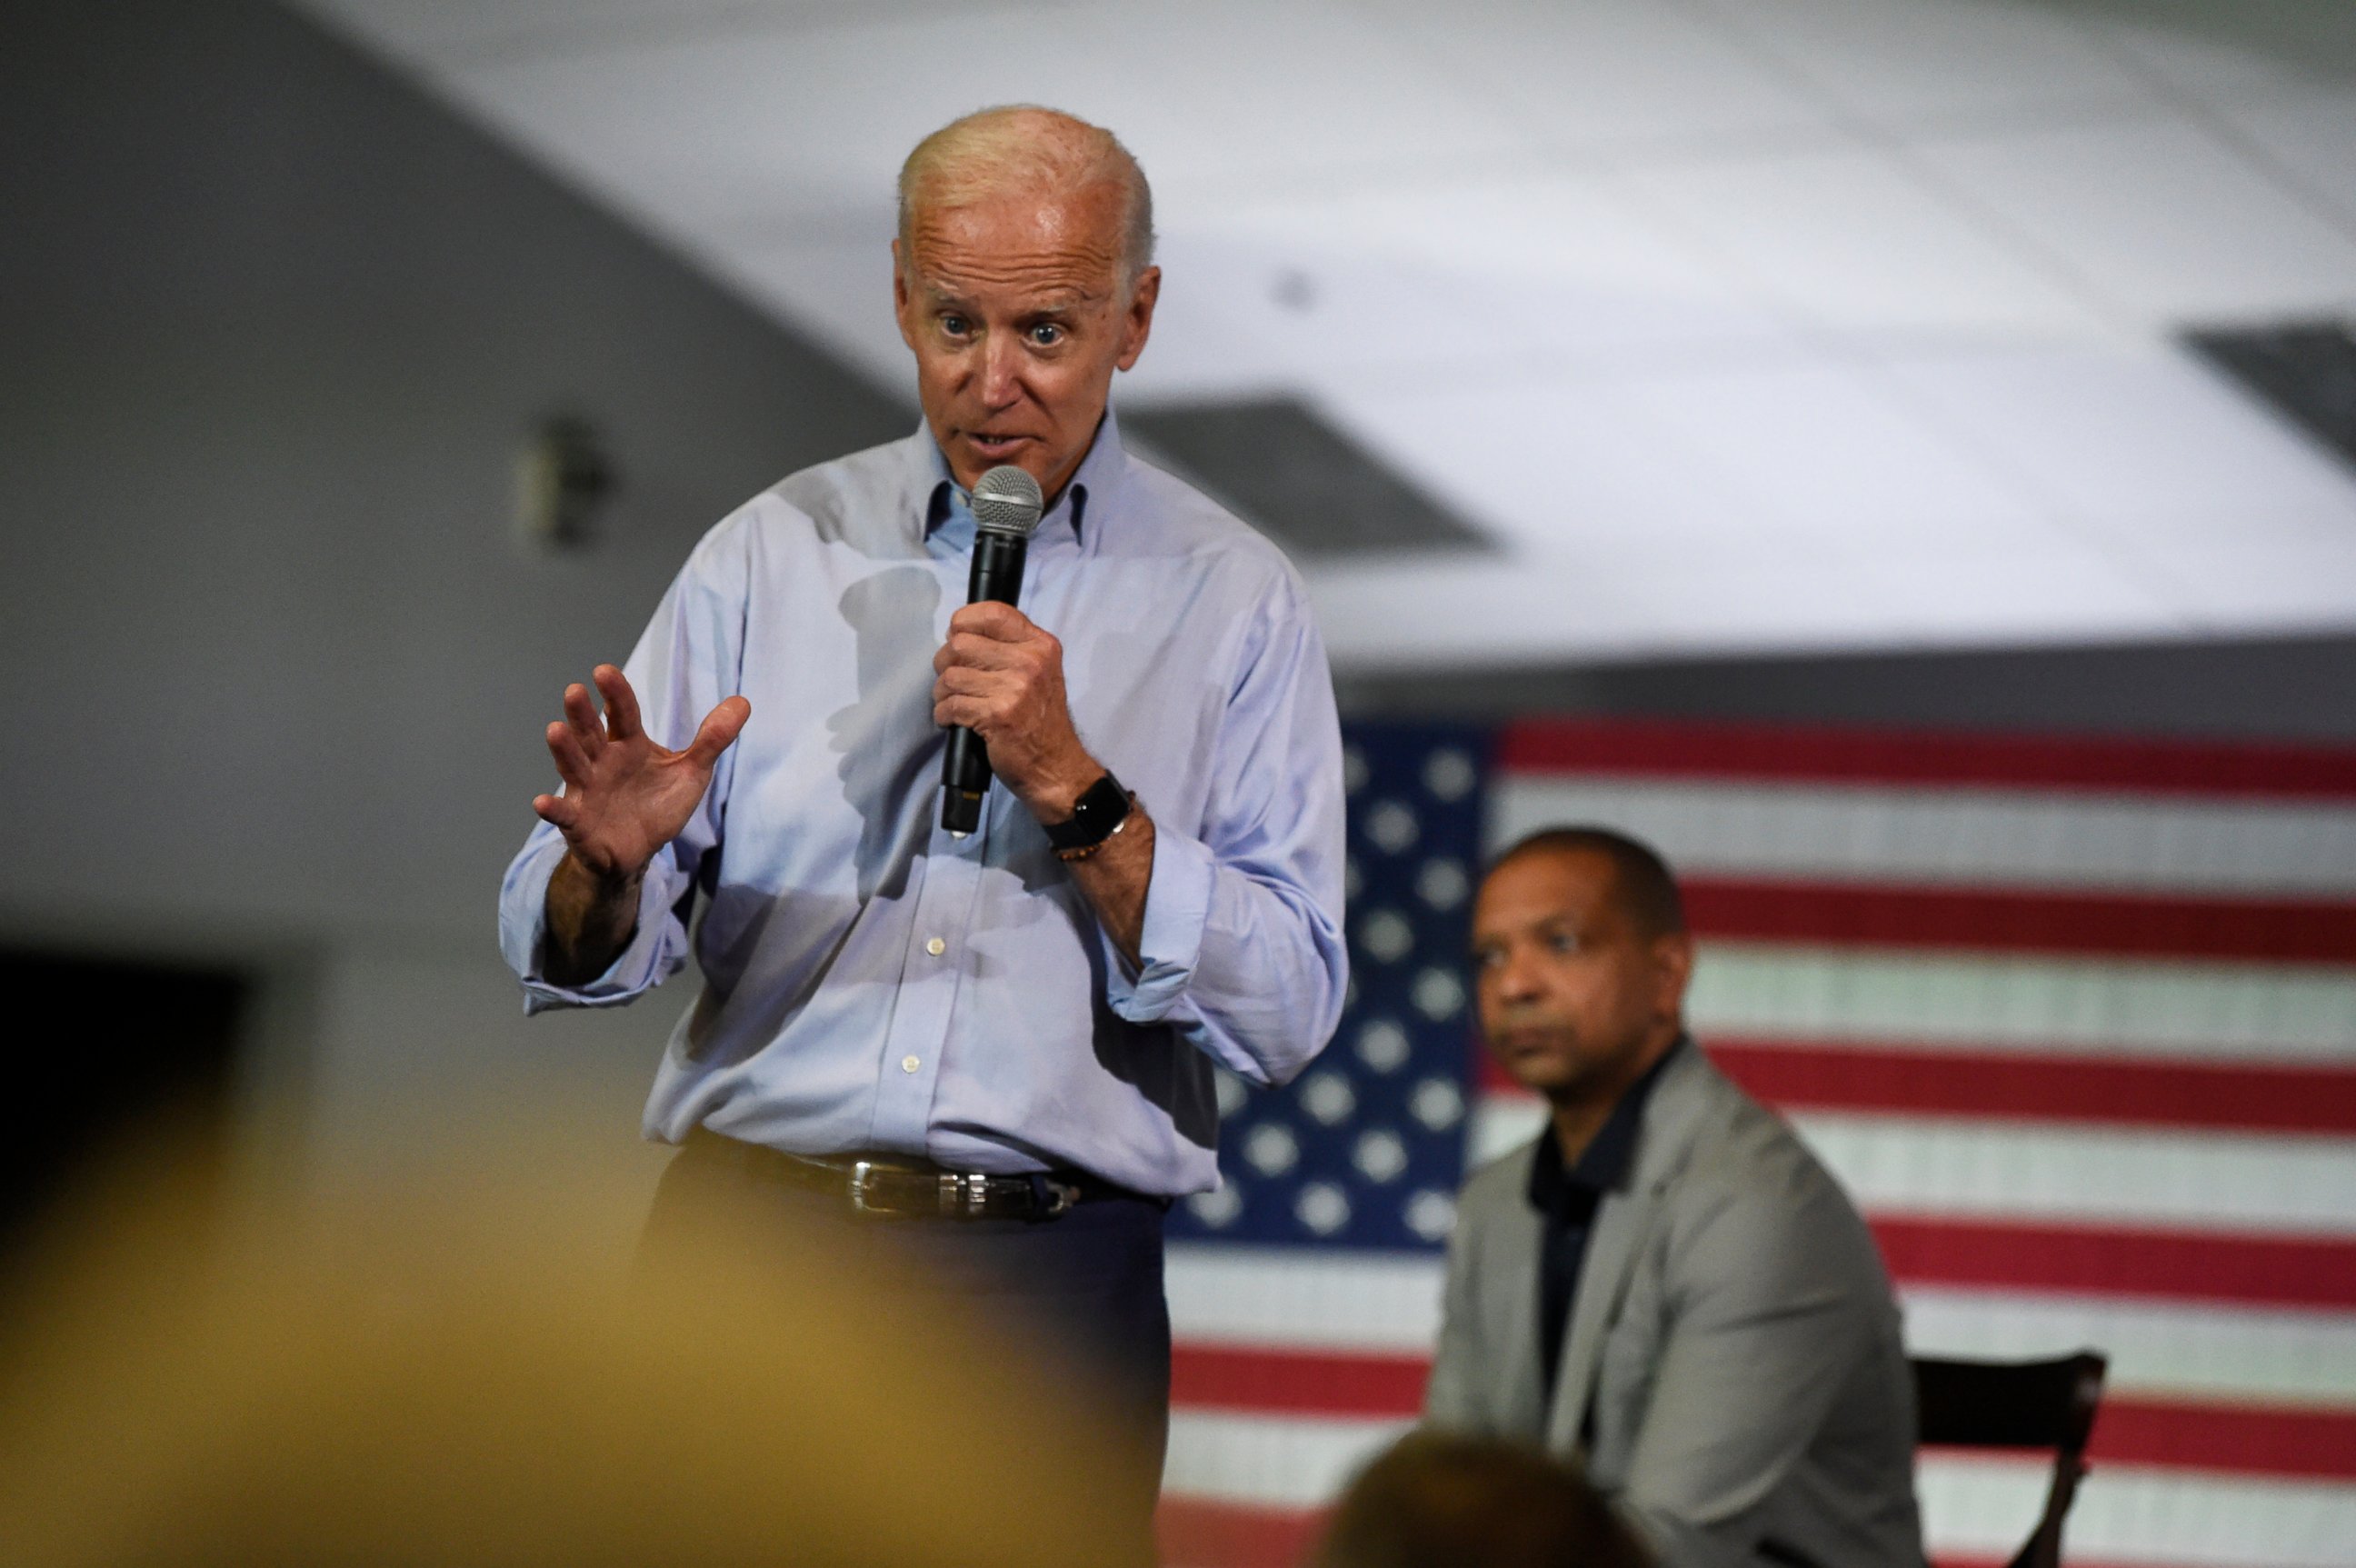 PHOTO: Democratic presidential candidate and former Vice President Joe Biden speaks at a town hall on Sunday, July 7, 2019, in Charleston, S.C., as state Sen. Marlon Kimpson looks on.